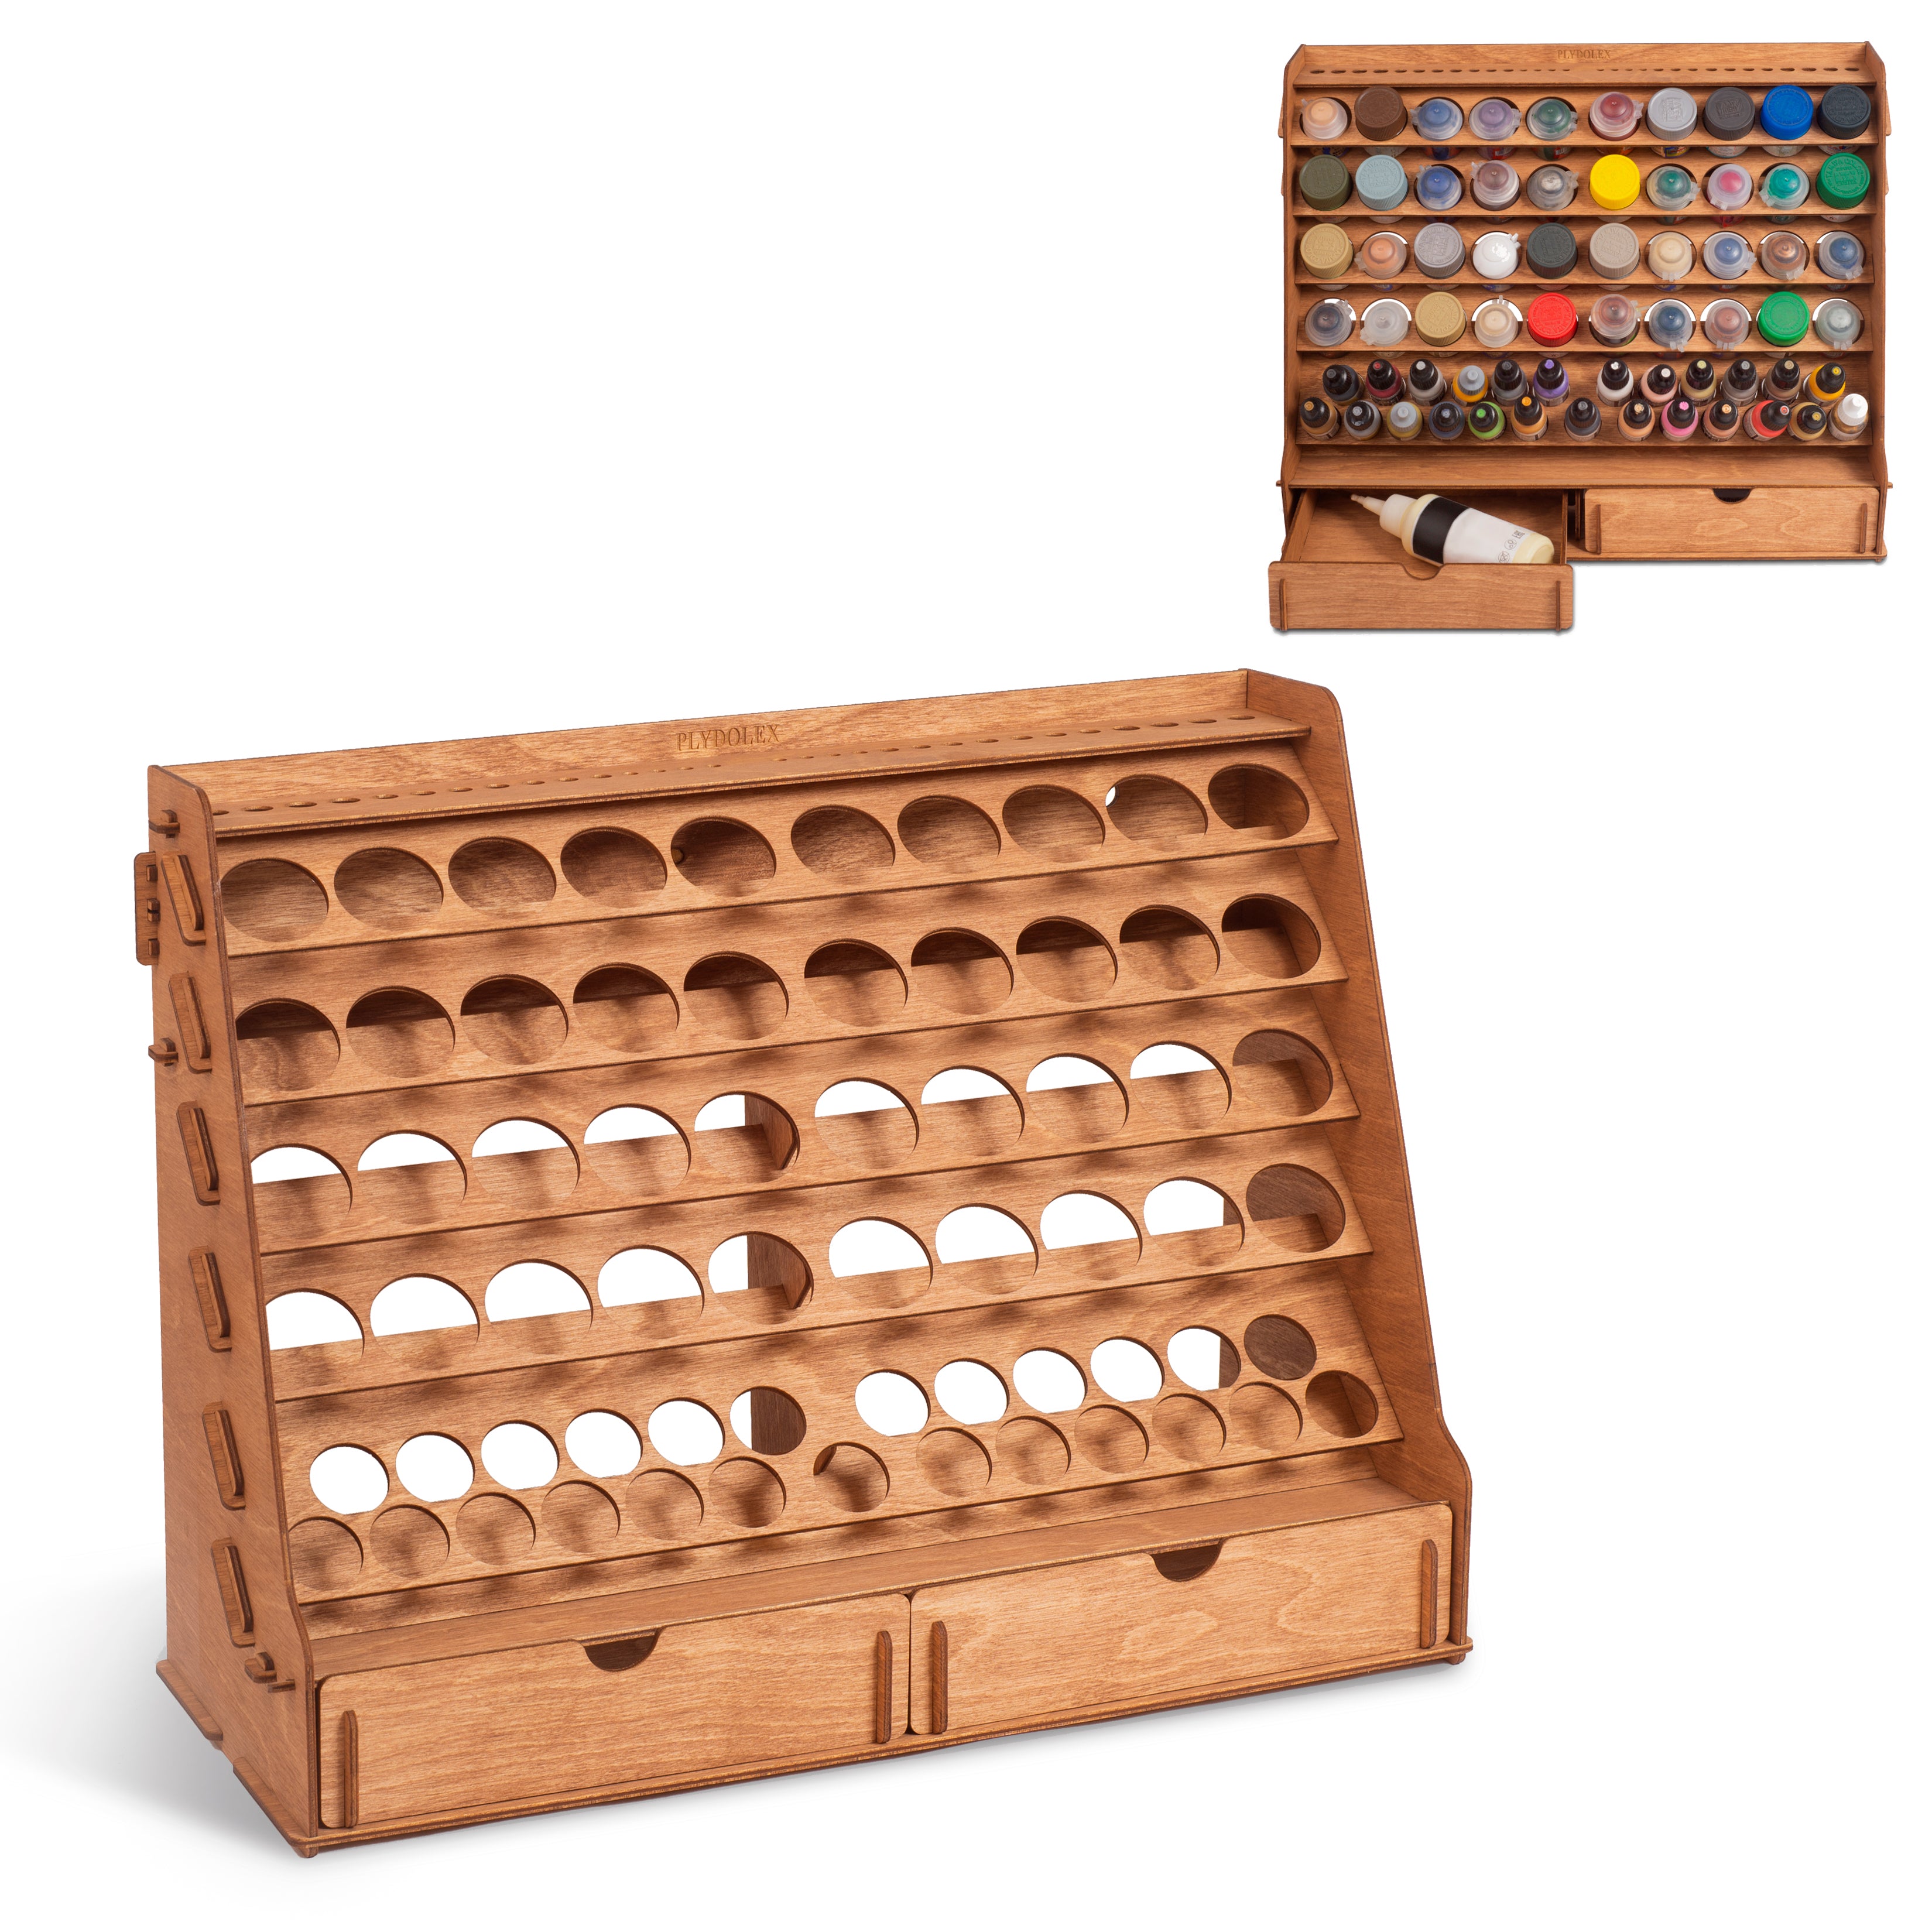 Plydolex Wooden Paint Organizer for 87 Paint Bottles and 14 Brushes - Paint  Brush Holder With 6 Miniature Stands and Top Shelf - Convenient Paint Rack